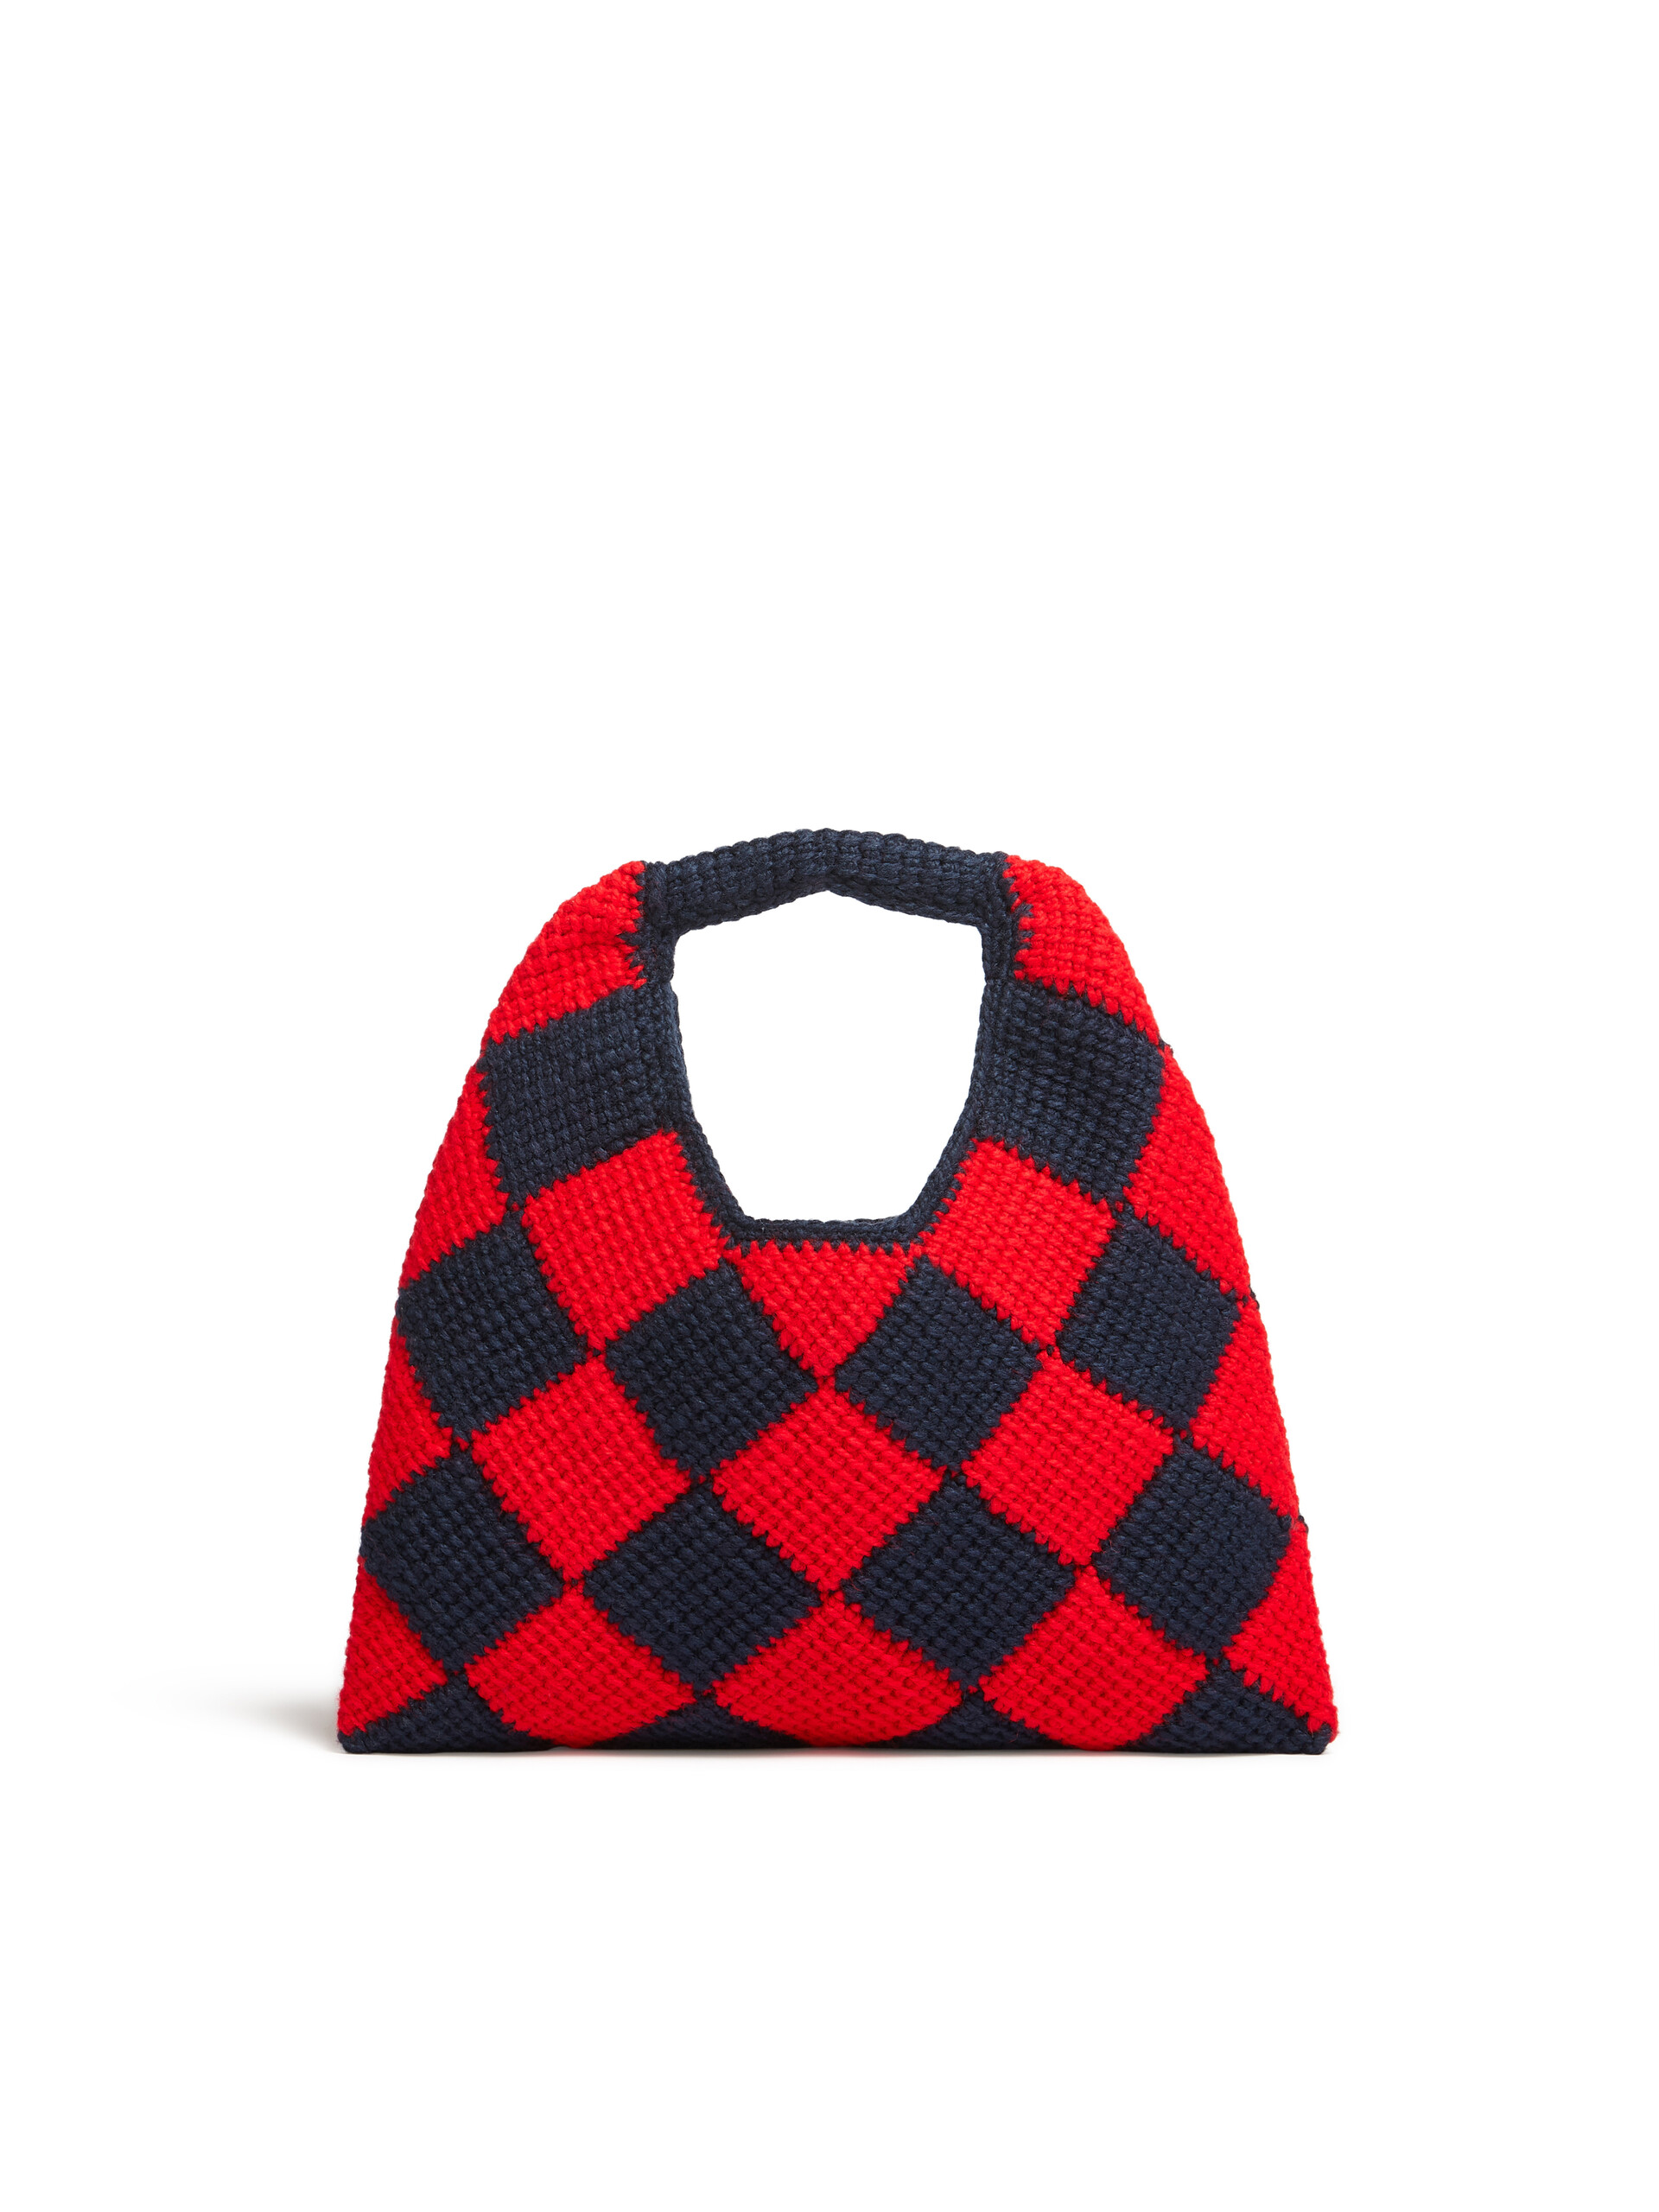 MARNI MARKET DIAMOND medium bag in blue and red tech wool - Bags - Image 3